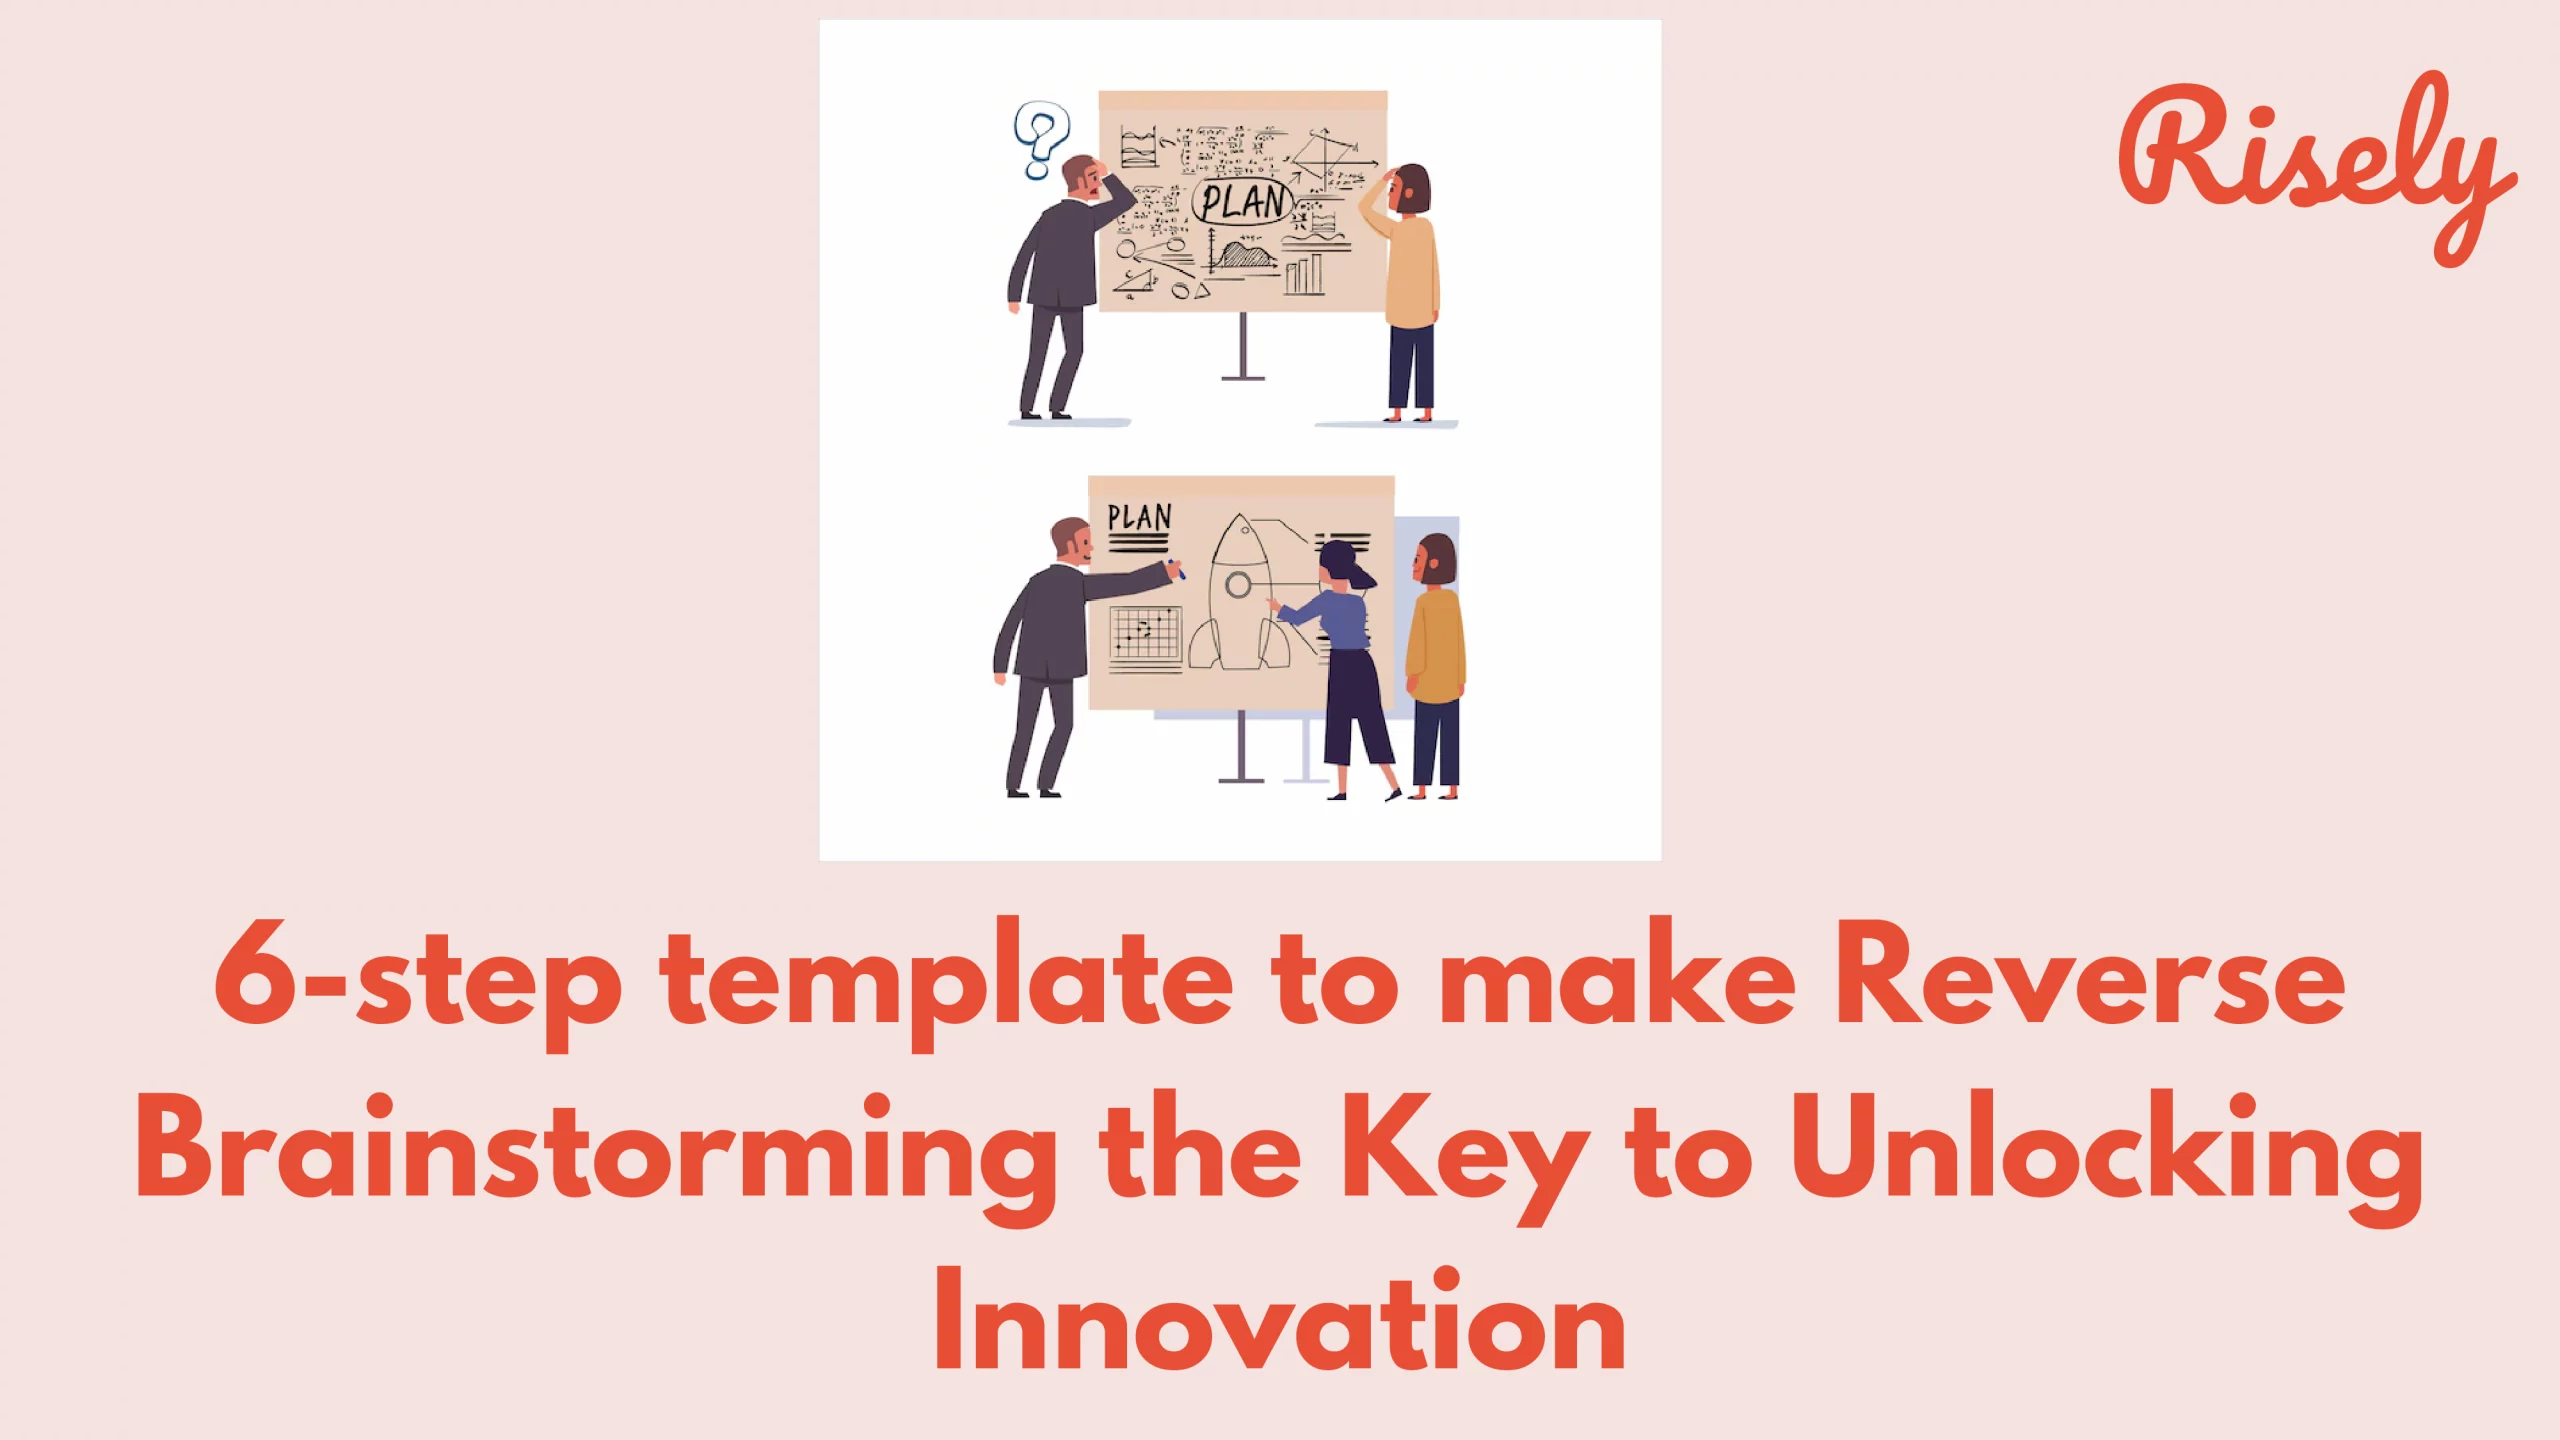 6-step template to make Reverse Brainstorming the Key to Unlocking Innovation